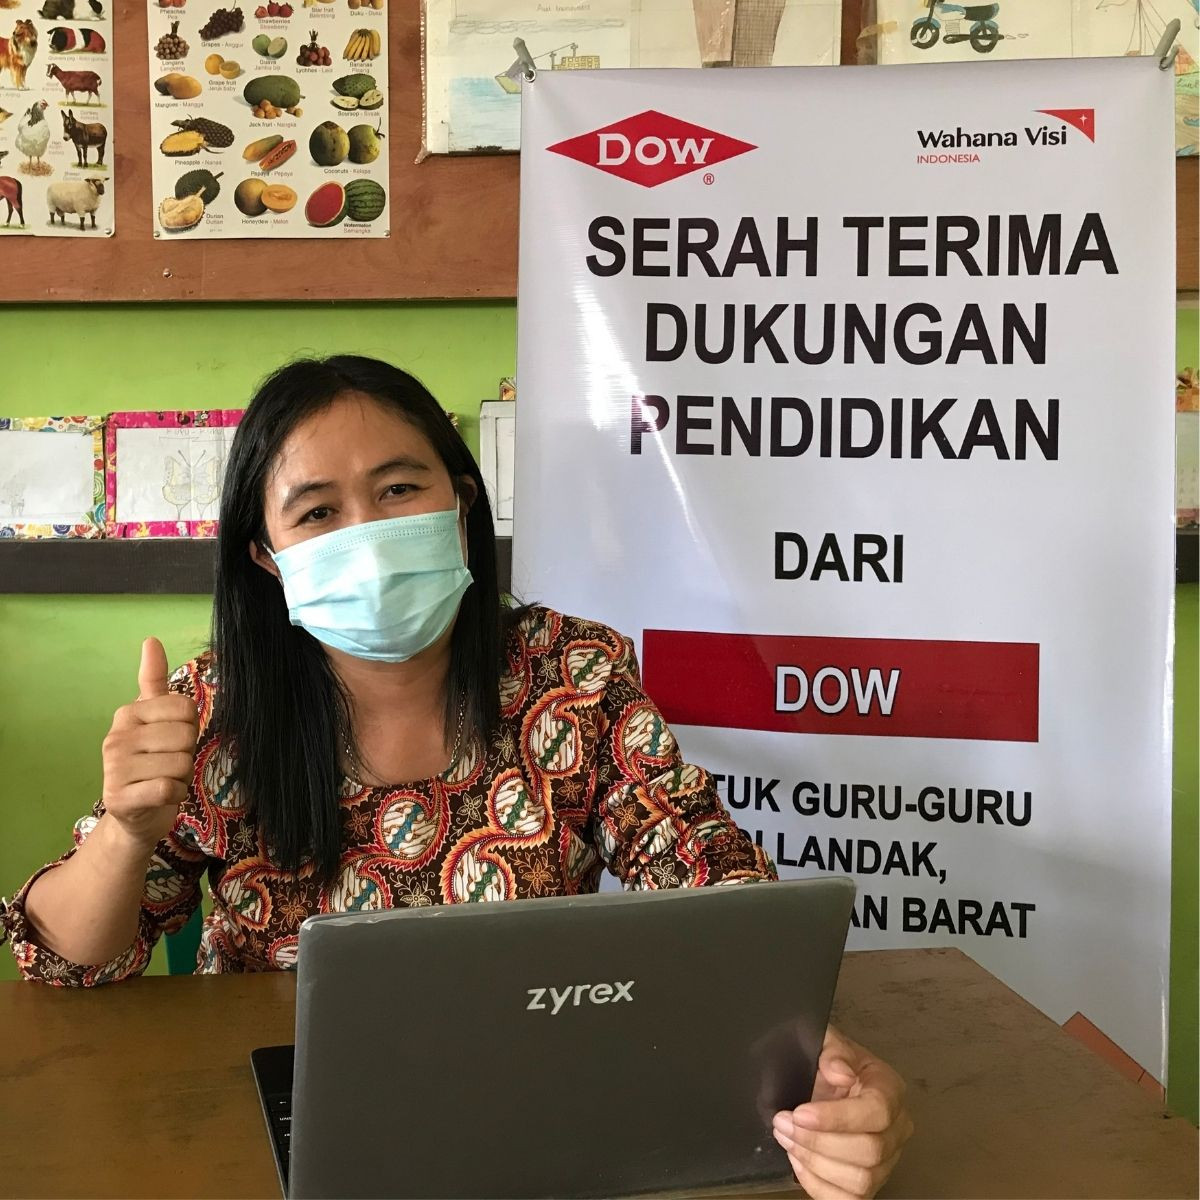 Supporting Education during the Pandemic, Dow Provides Educational Assistance in Jakarta and Landak